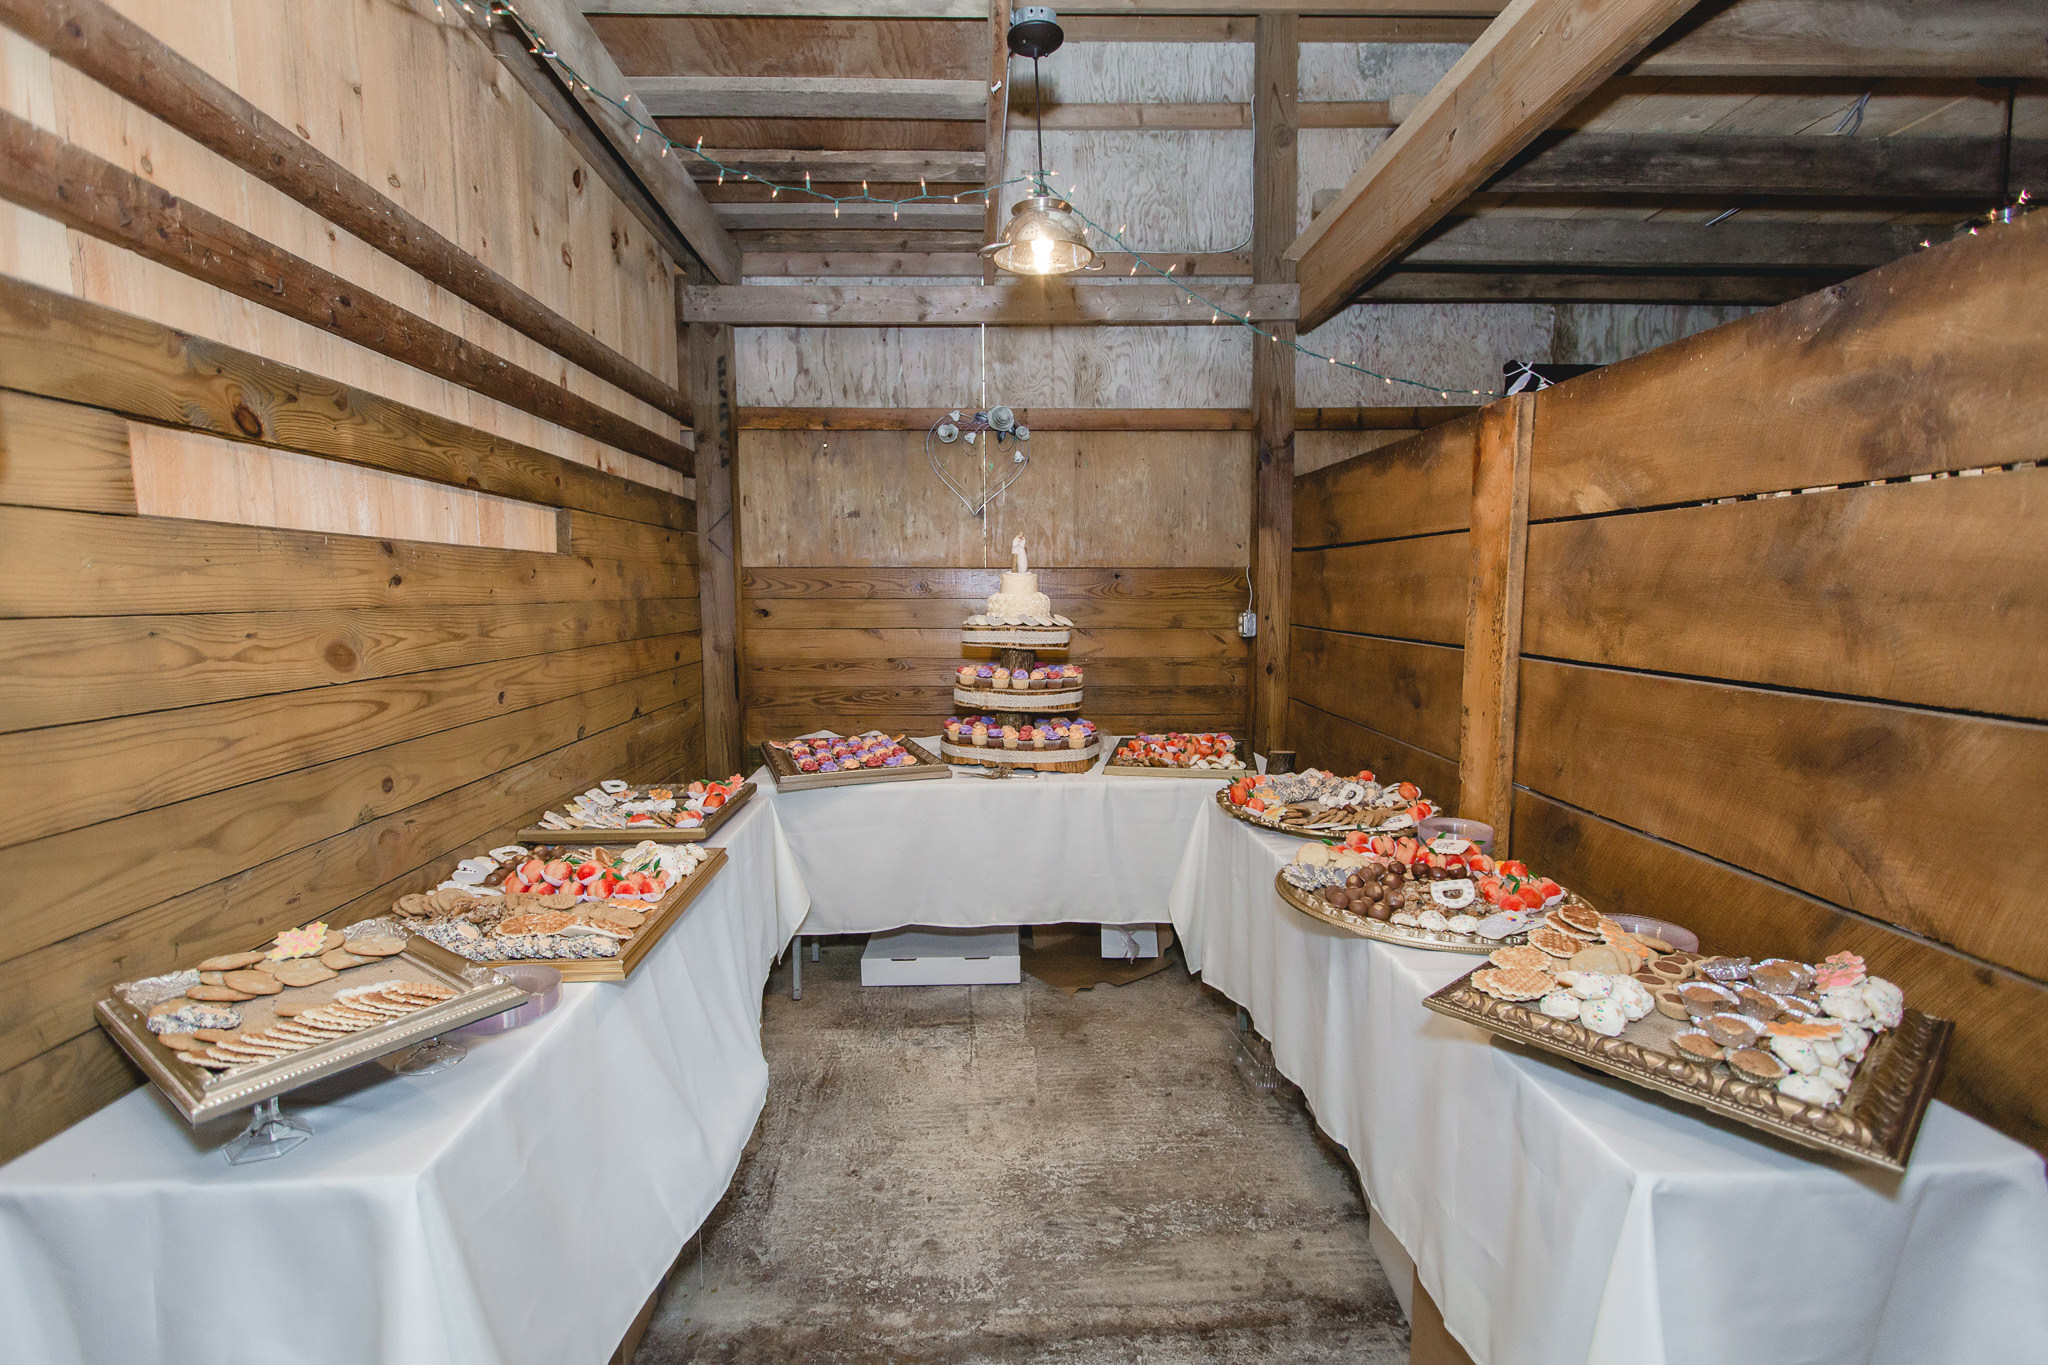 Wedding cake and cookie table layout at the Barn at Soergel Hollow